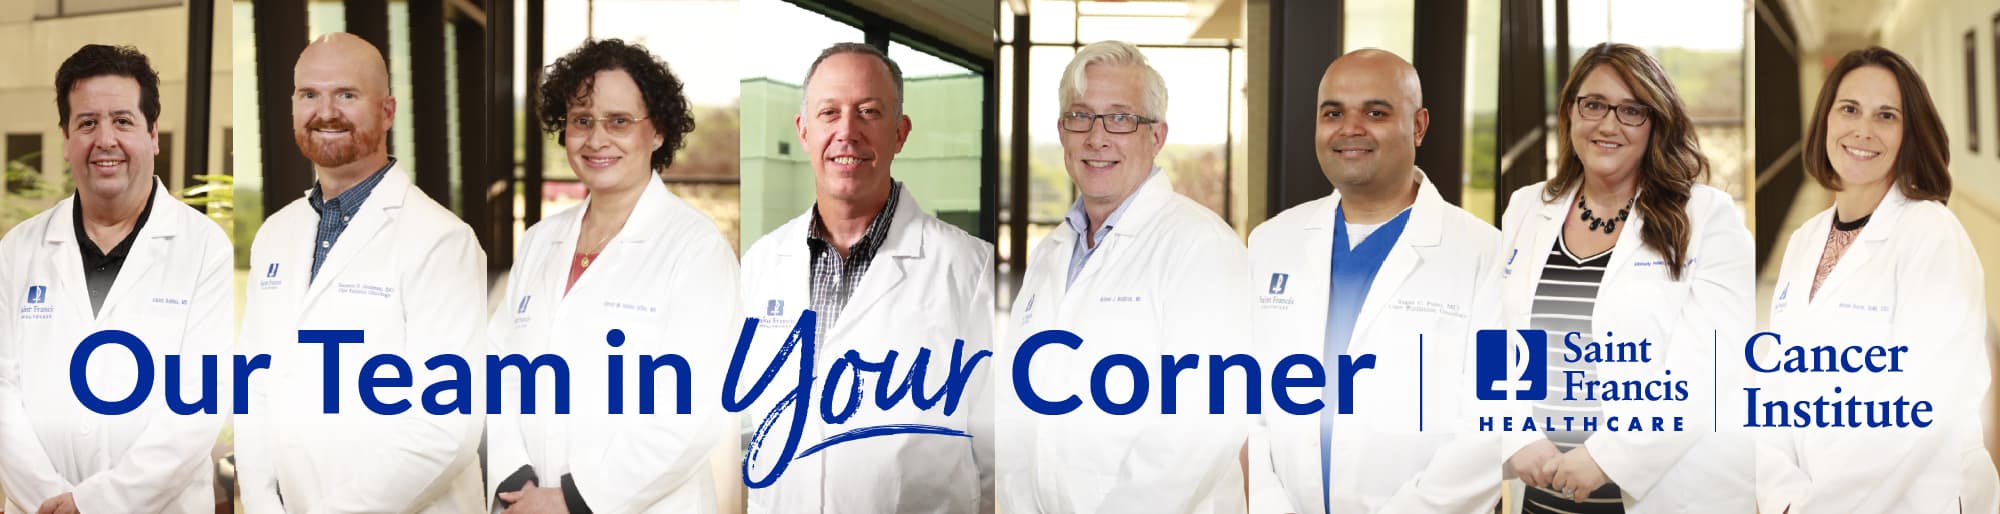 The Saint Francis Cancer Institute - Our Team in Your Corner